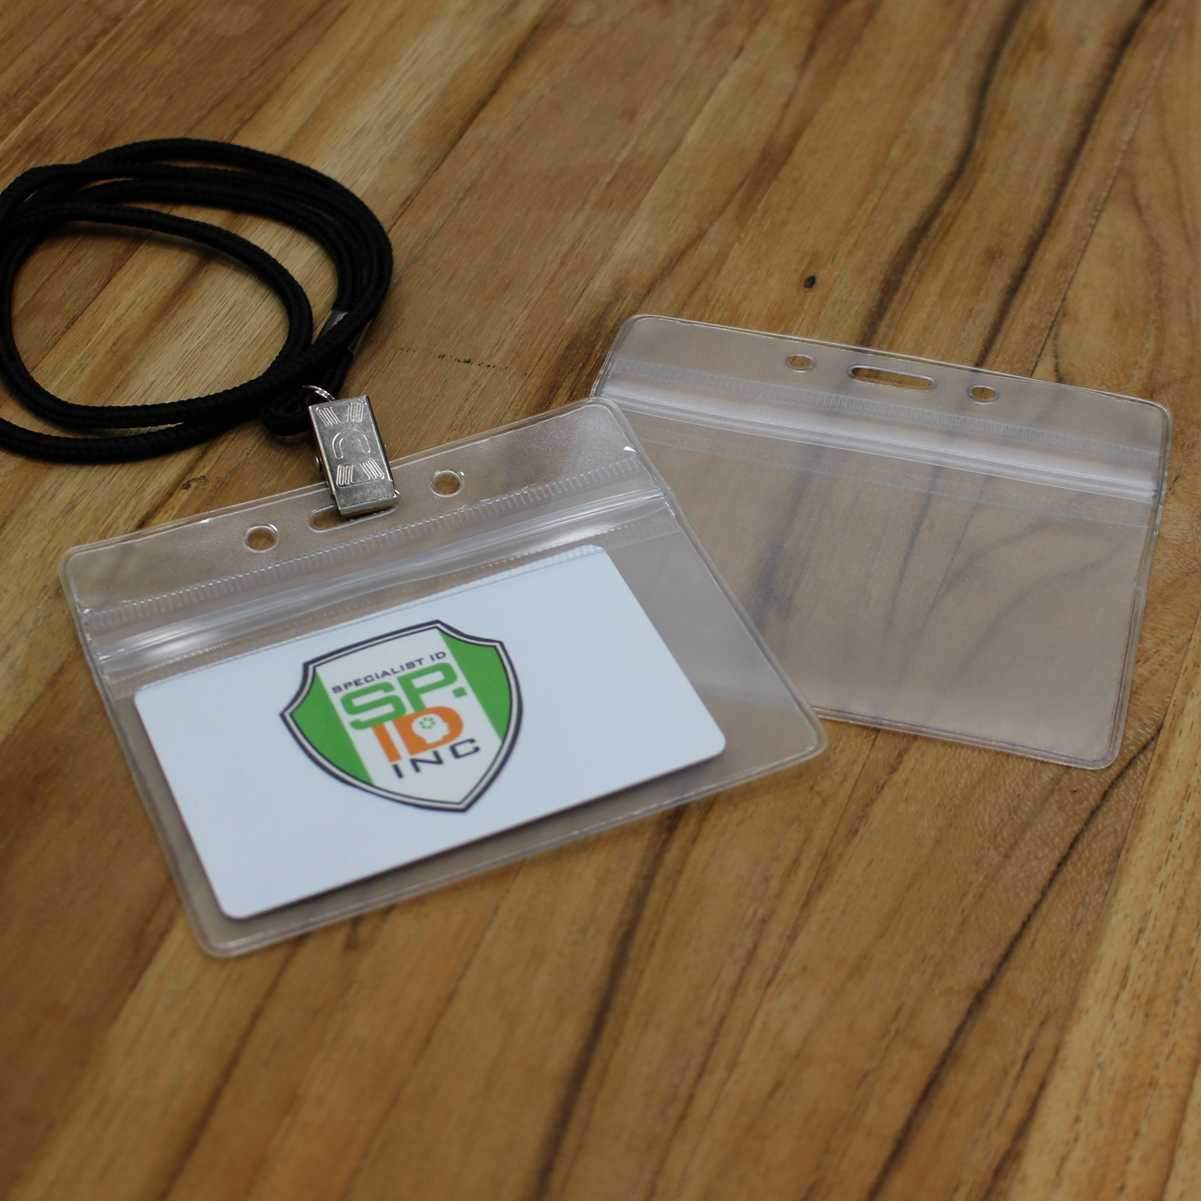 Two clear Horizontal Vinyl Badge Holders with Zipper Top (506-ZHOS-CLR), one empty and the other containing a white card with a green and orange shield logo. Both lie on a wooden surface, with a black lanyard attached to one. The design offers excellent ID card protection.